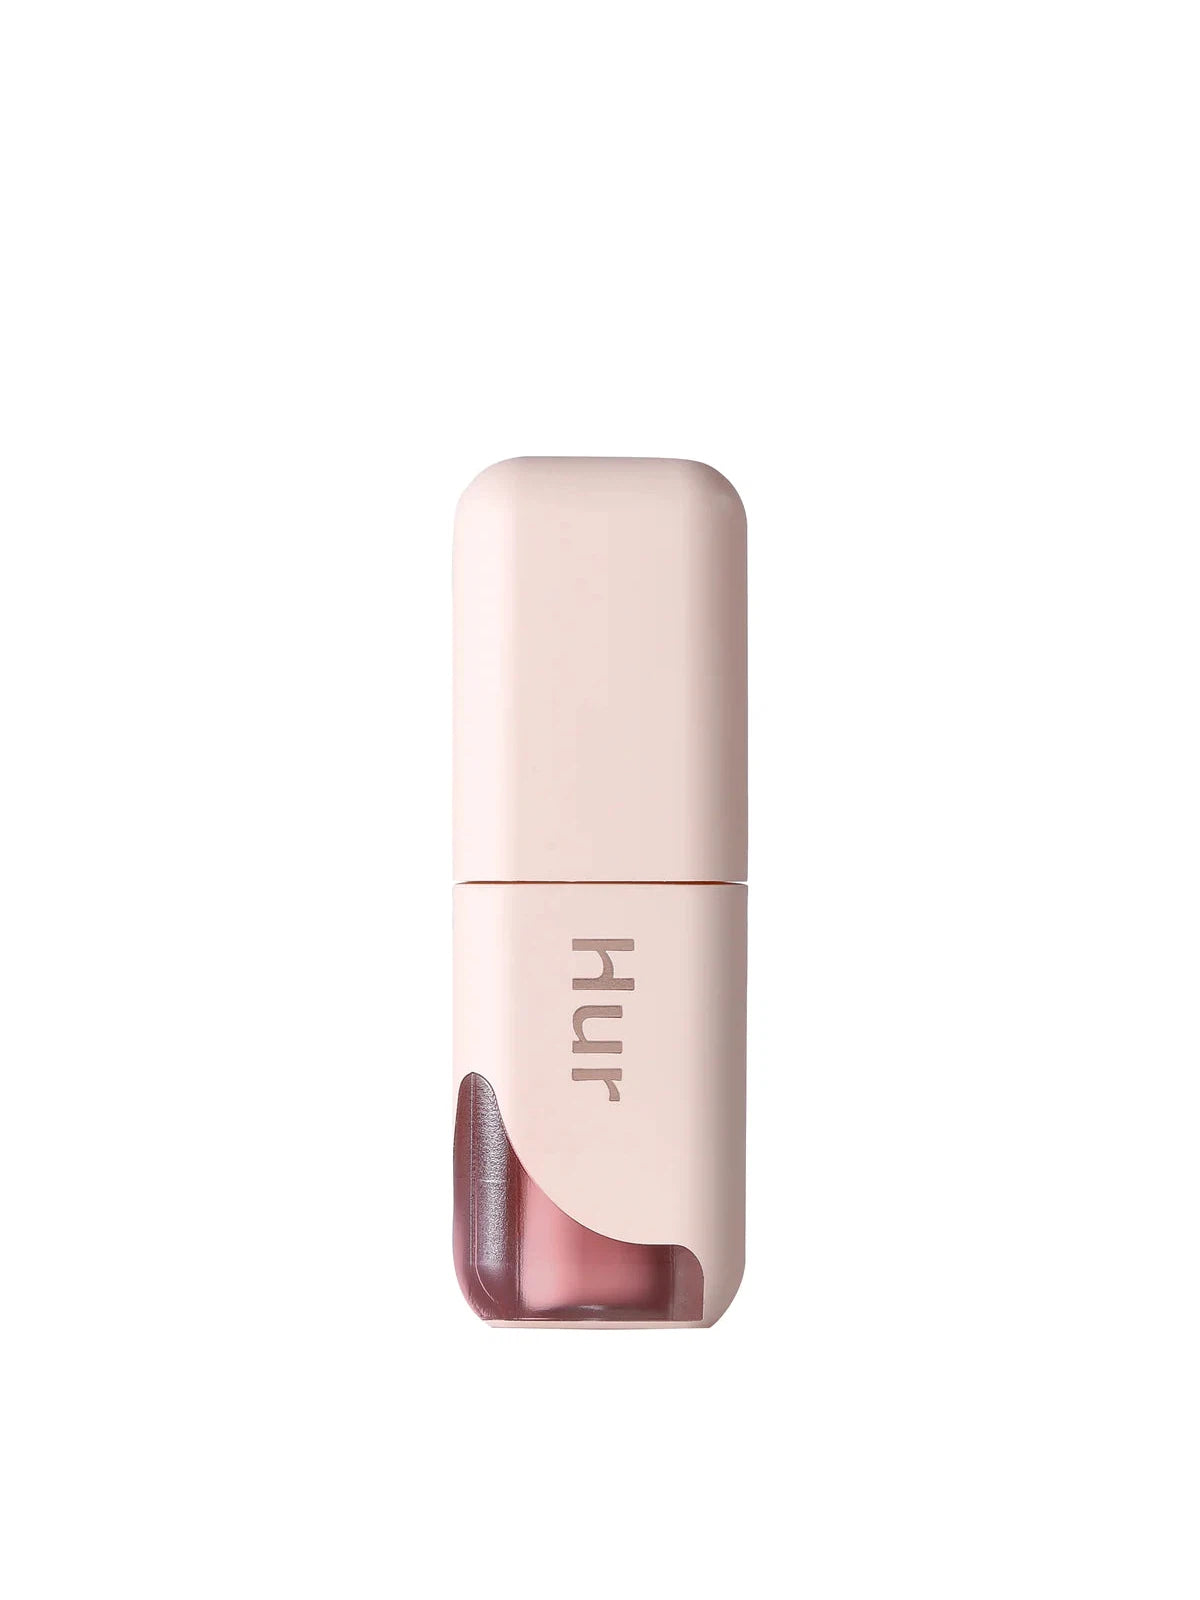 House of Hur Glowy Ampoule Tint